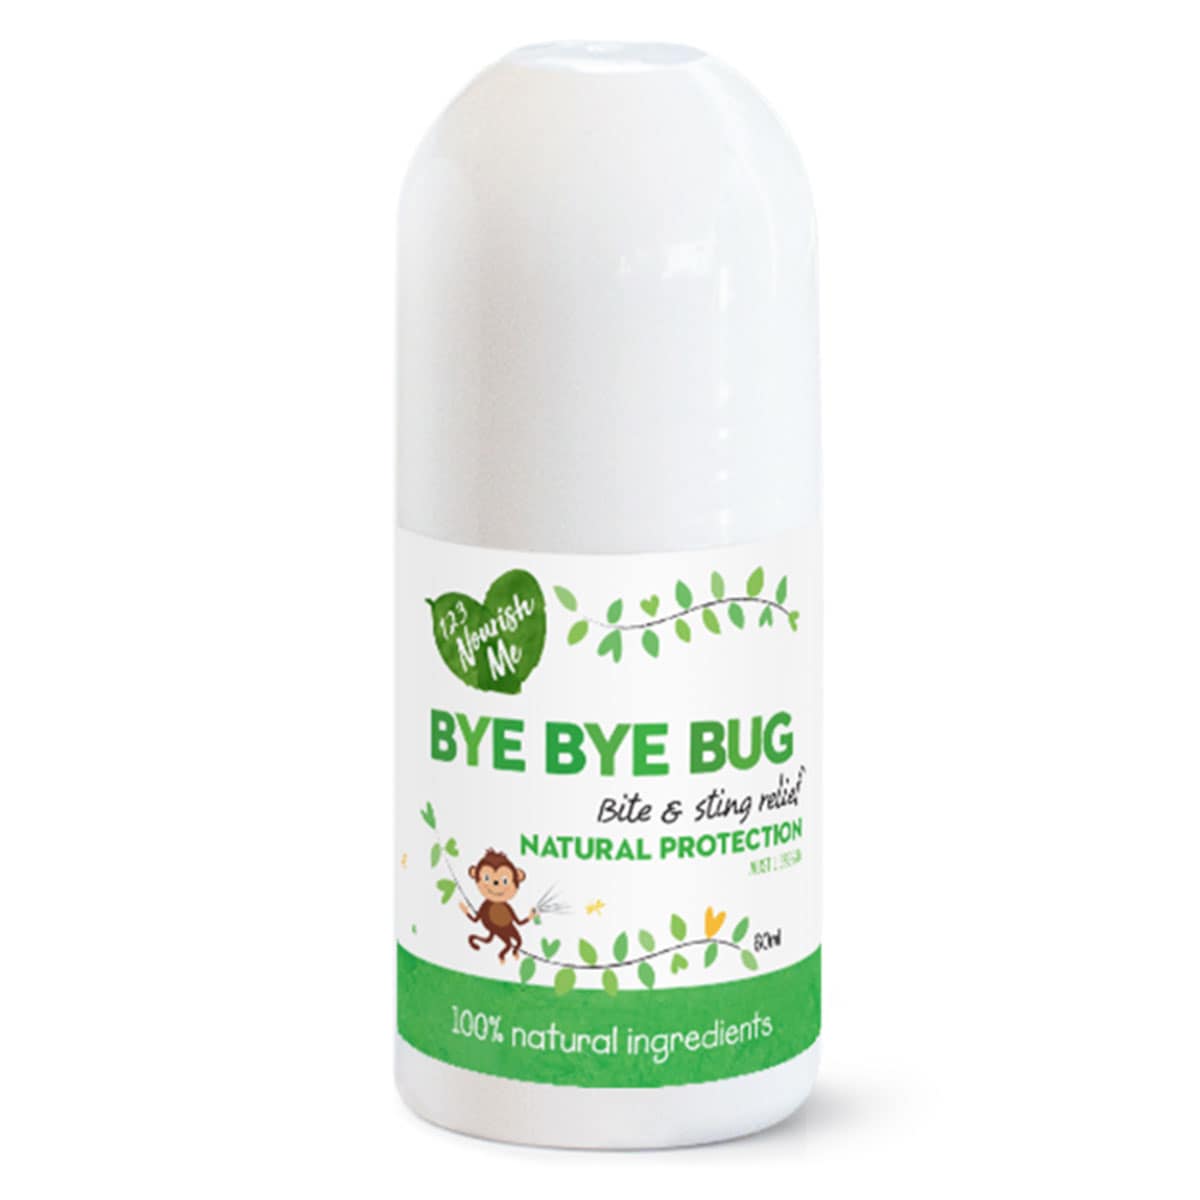 123 Nourish Me Bye Bye Bug Insect Repellent Roll-On 60ml